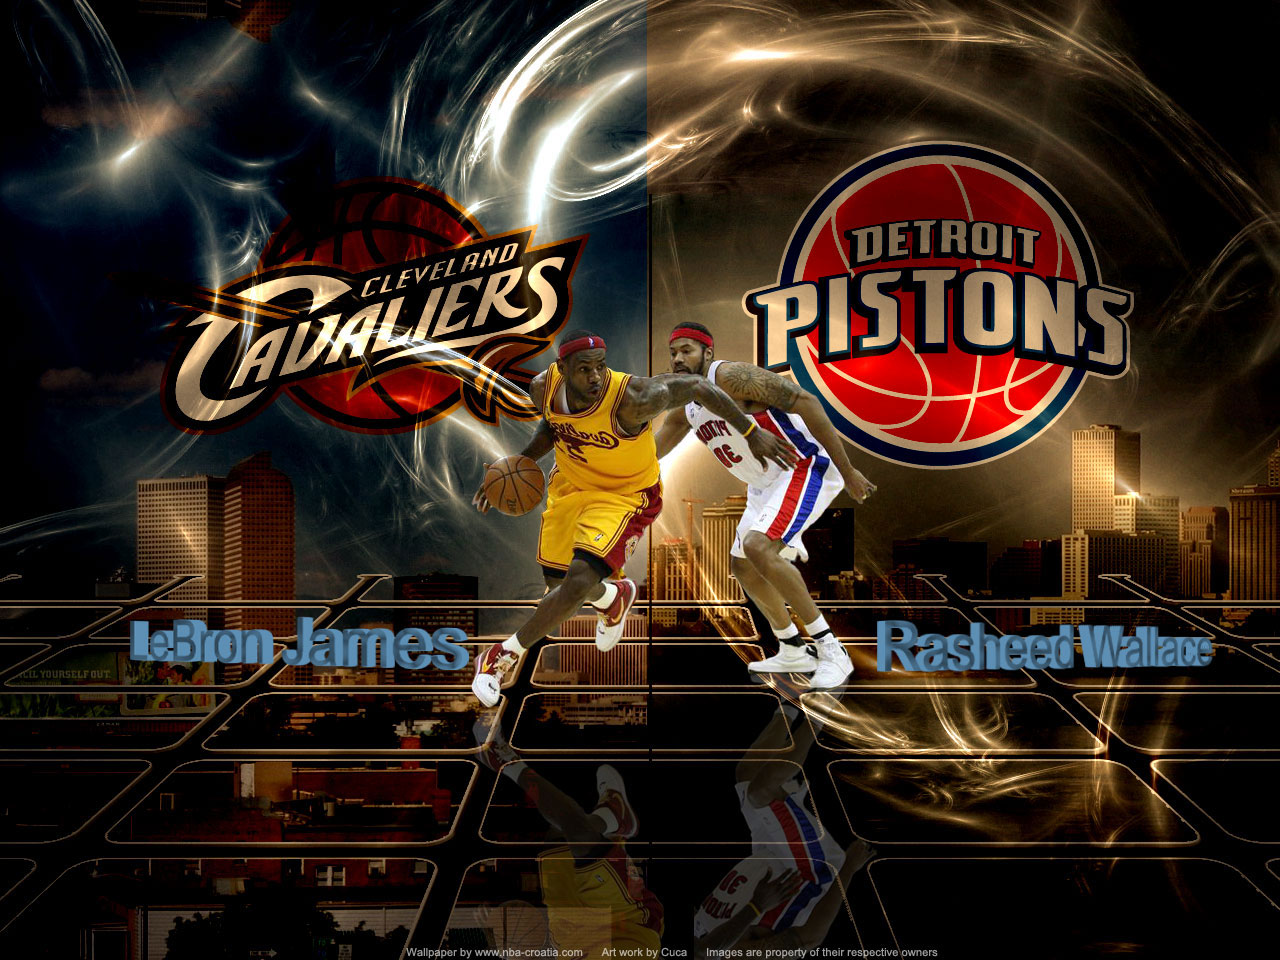  the first one i'm adding is wallpaper of Cavaliers vs Pistons with 